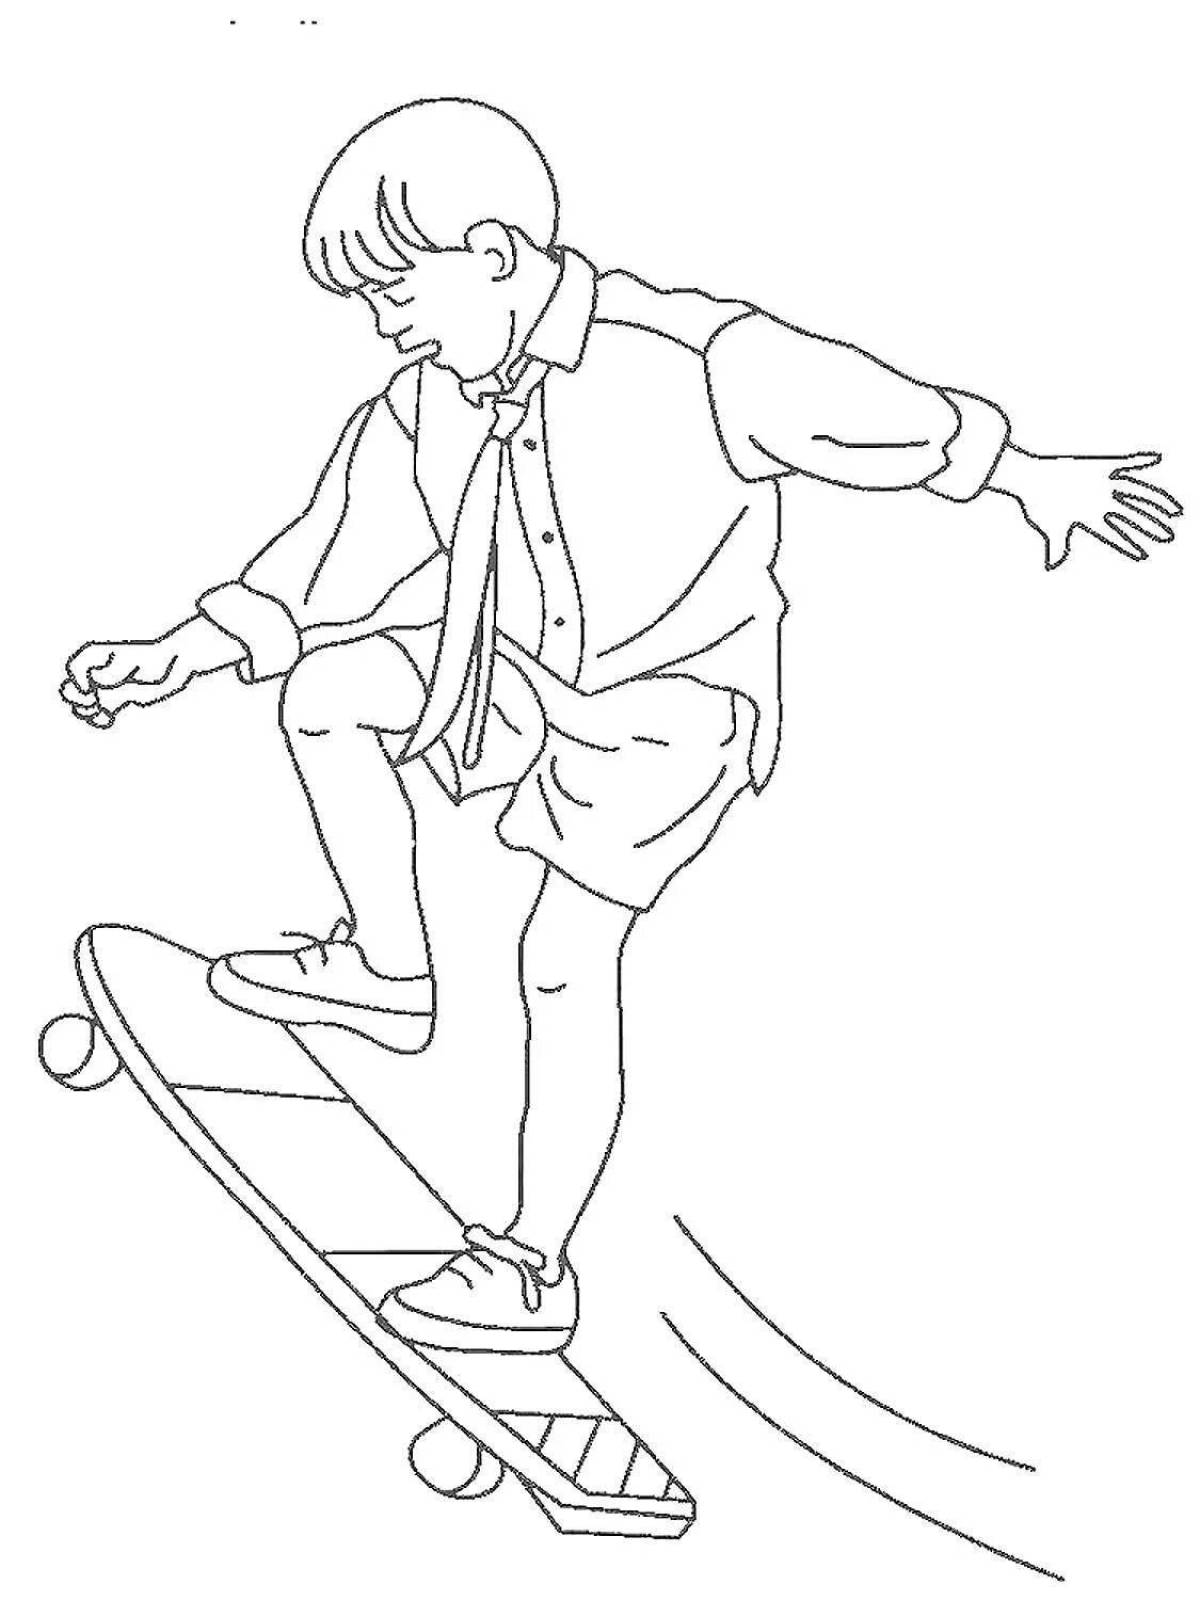 Coloring book talented skateboarder